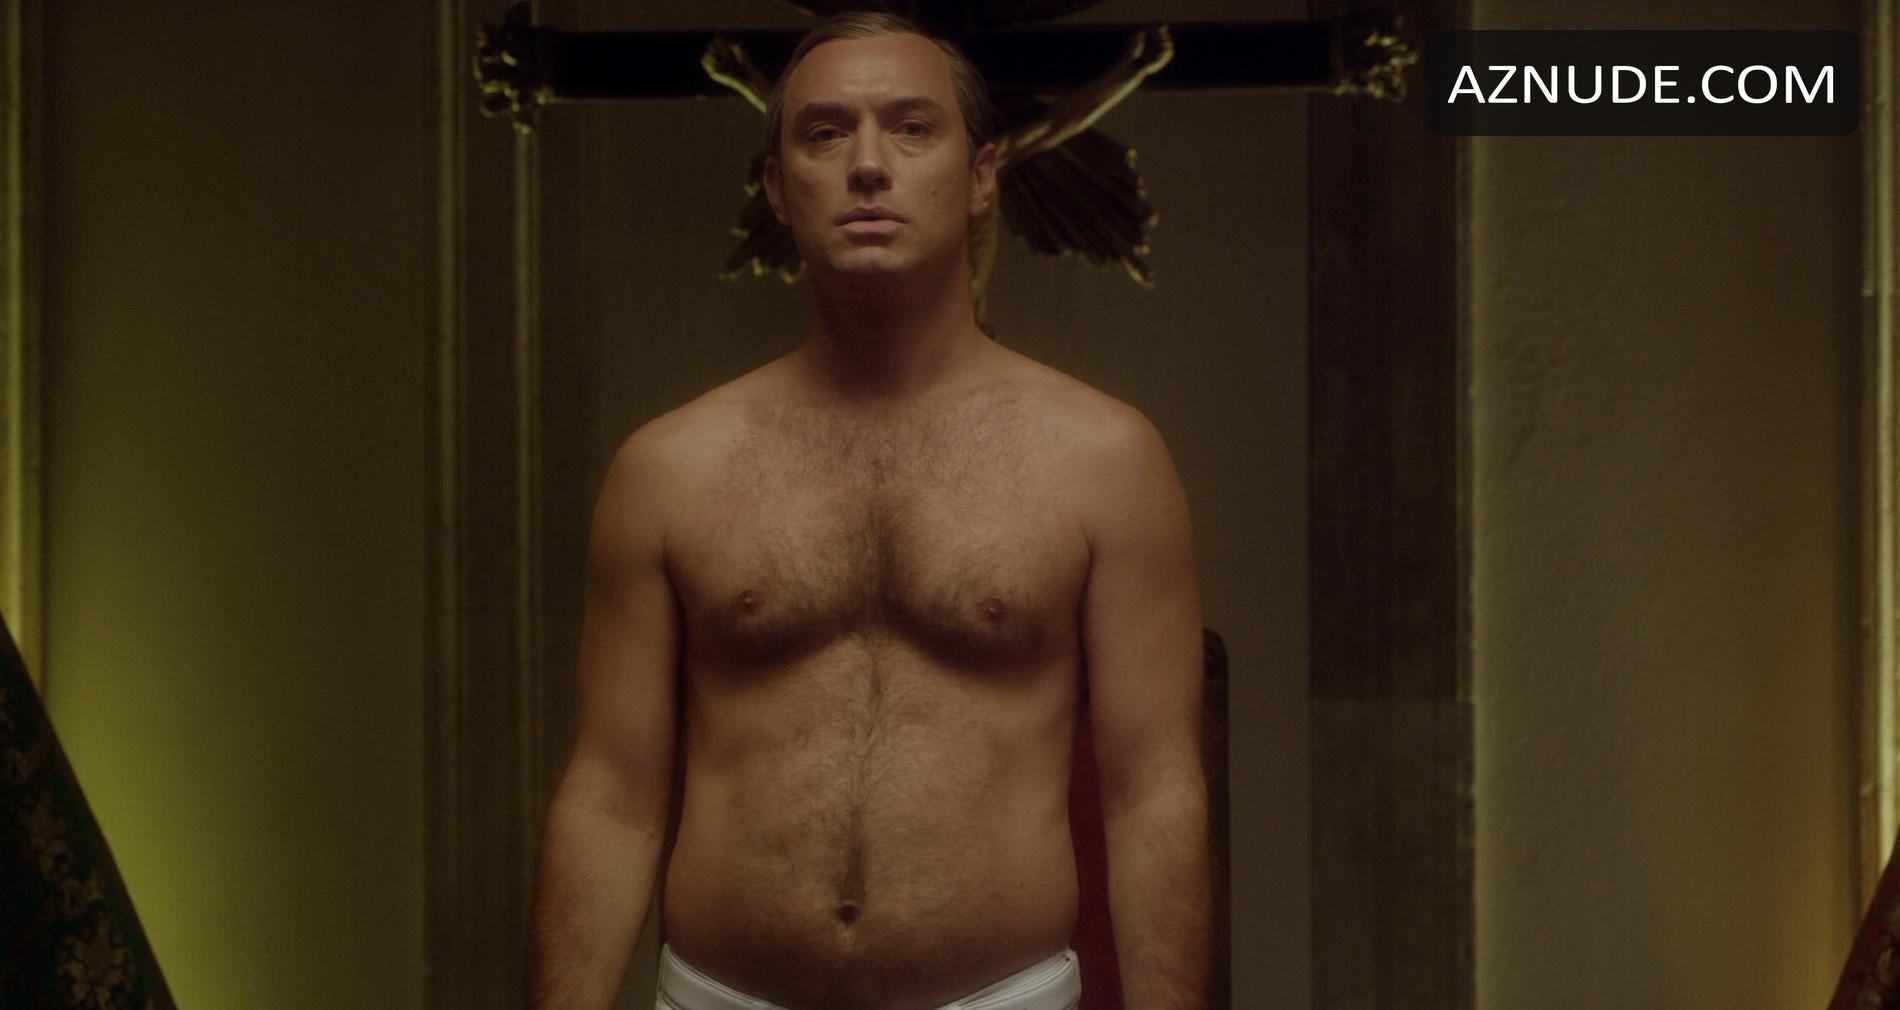 The young pope nudity